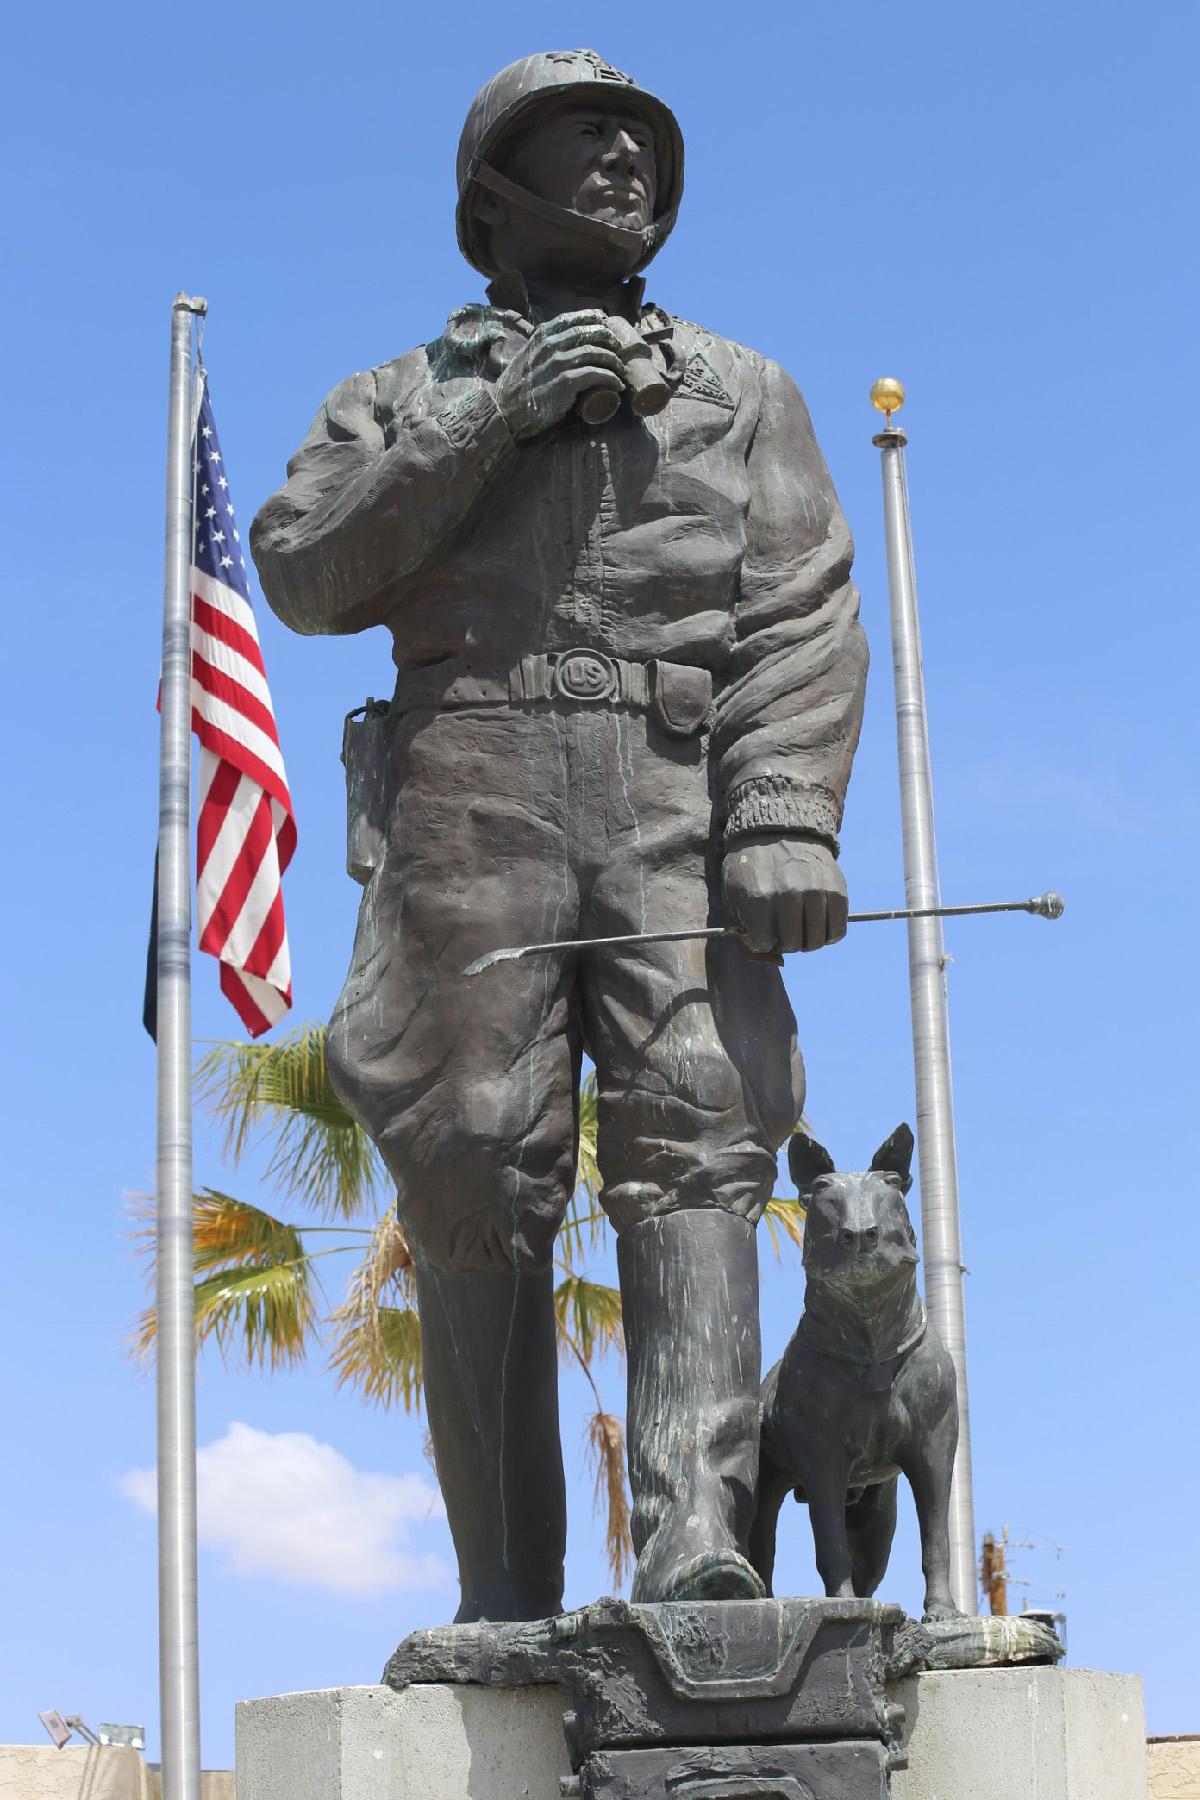 A statue of Gen. George Patton stands at the General Patton Memorial Museum in Chiriaco Summit, California. (Alan Moulton/Dreamstime.com)